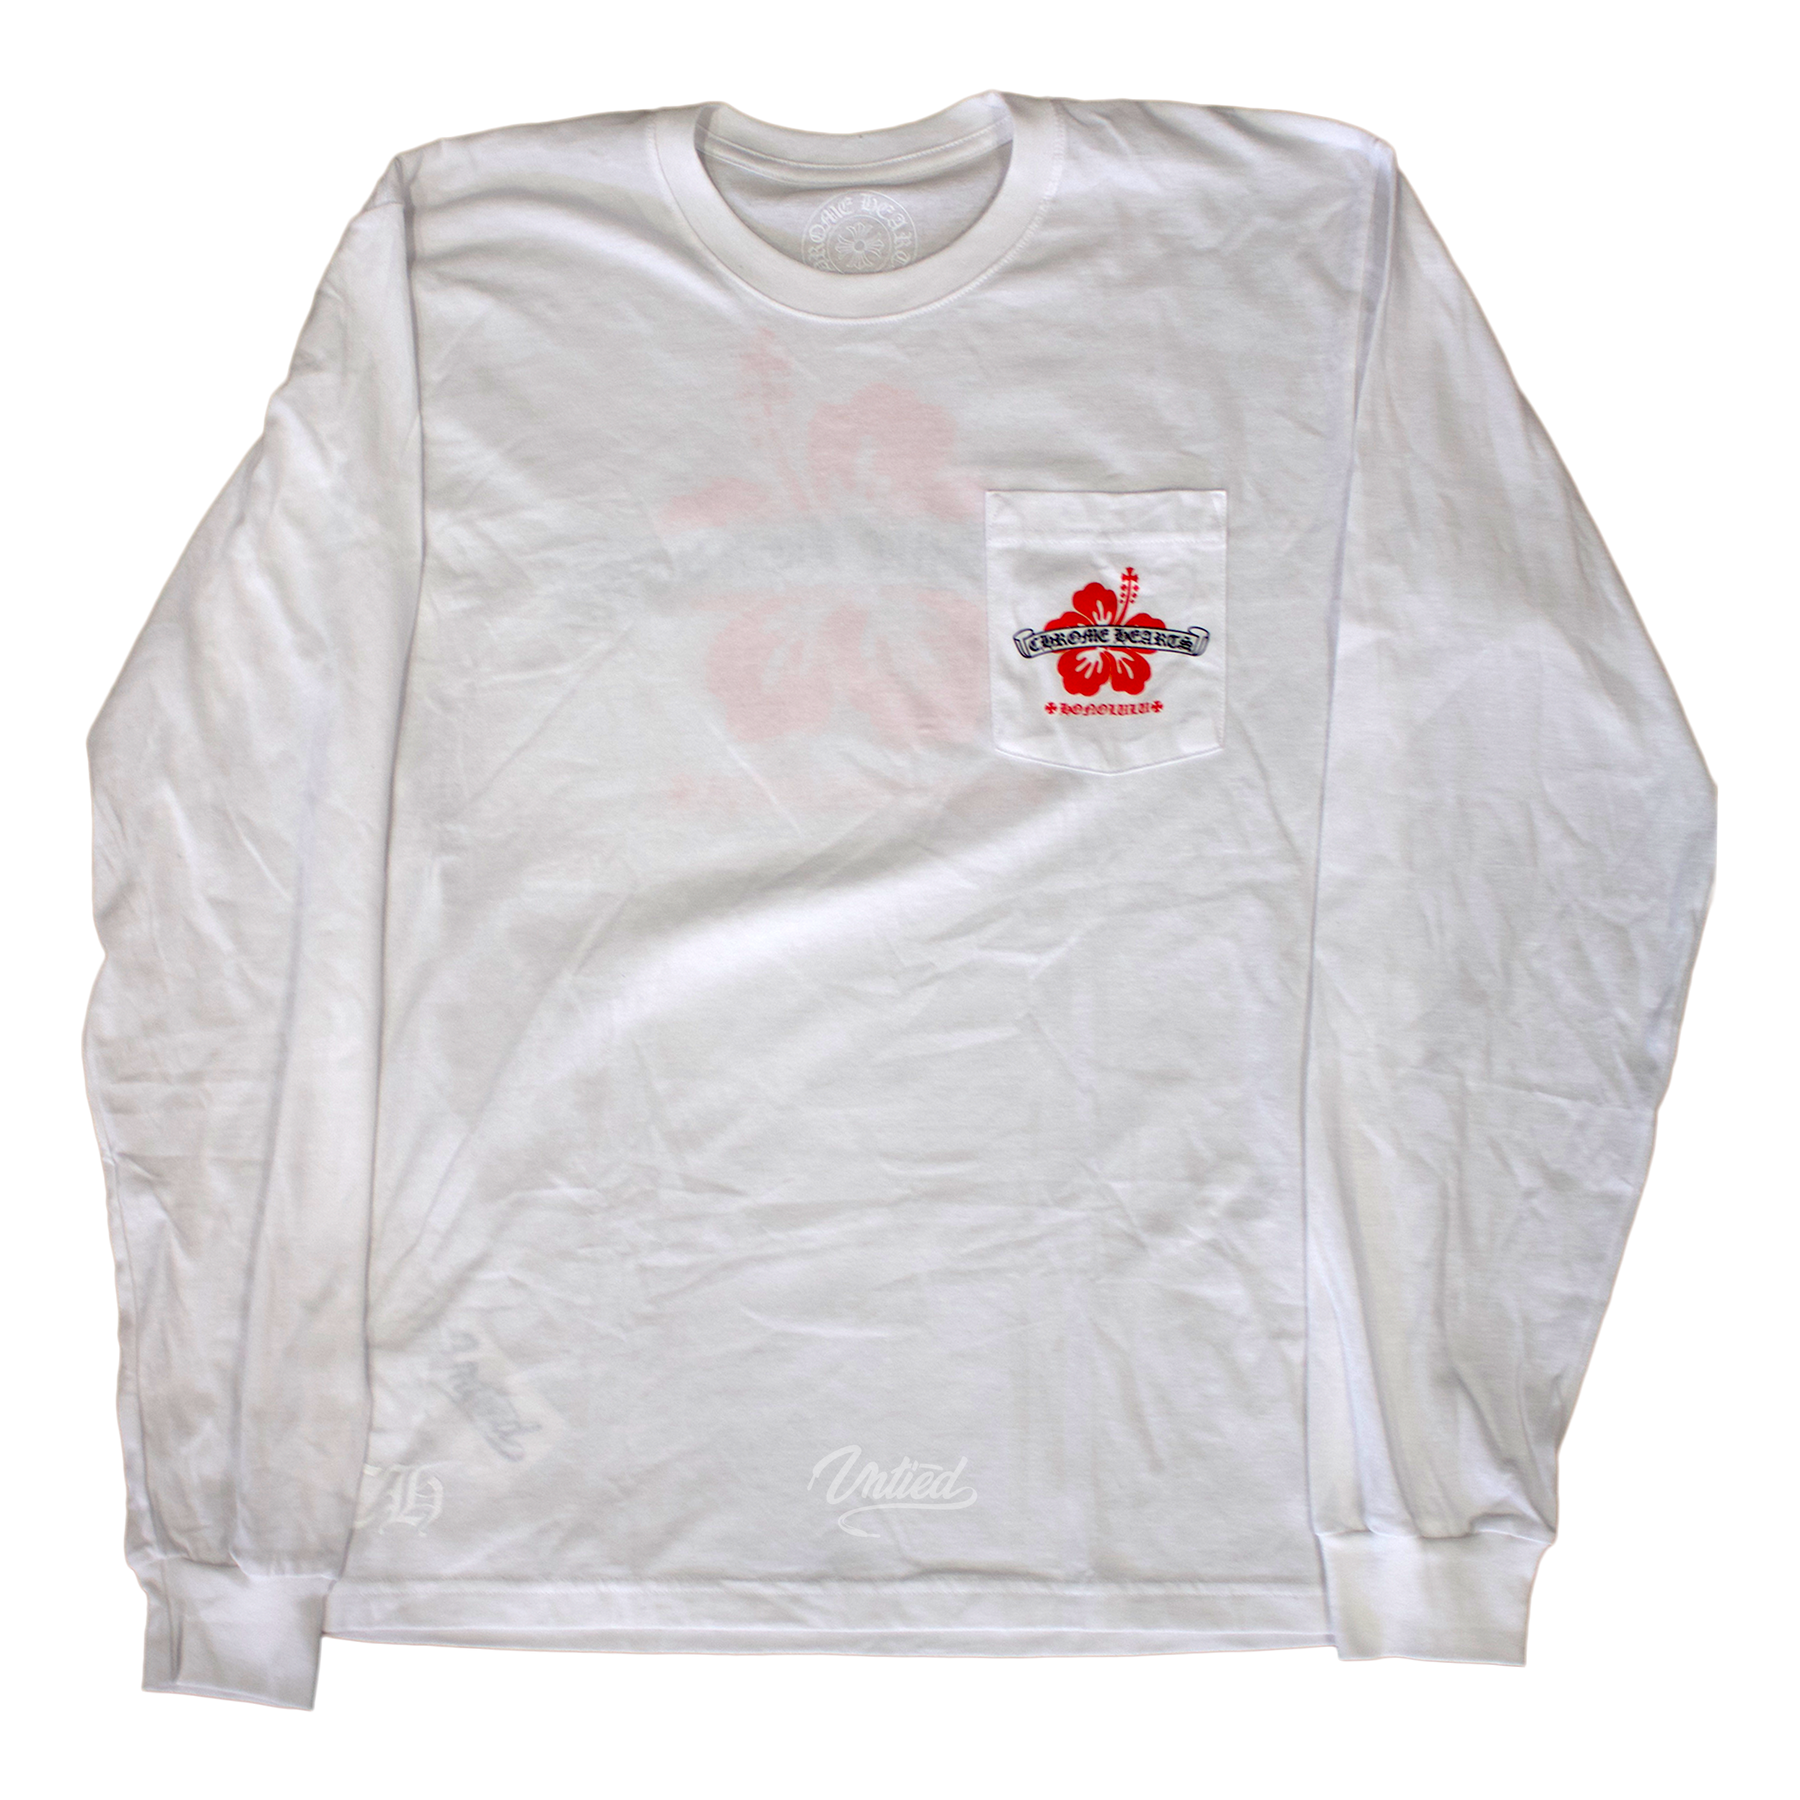 Chrome Hearts Honolulu Floral Pocket Crew L/S Tee "White/Red"